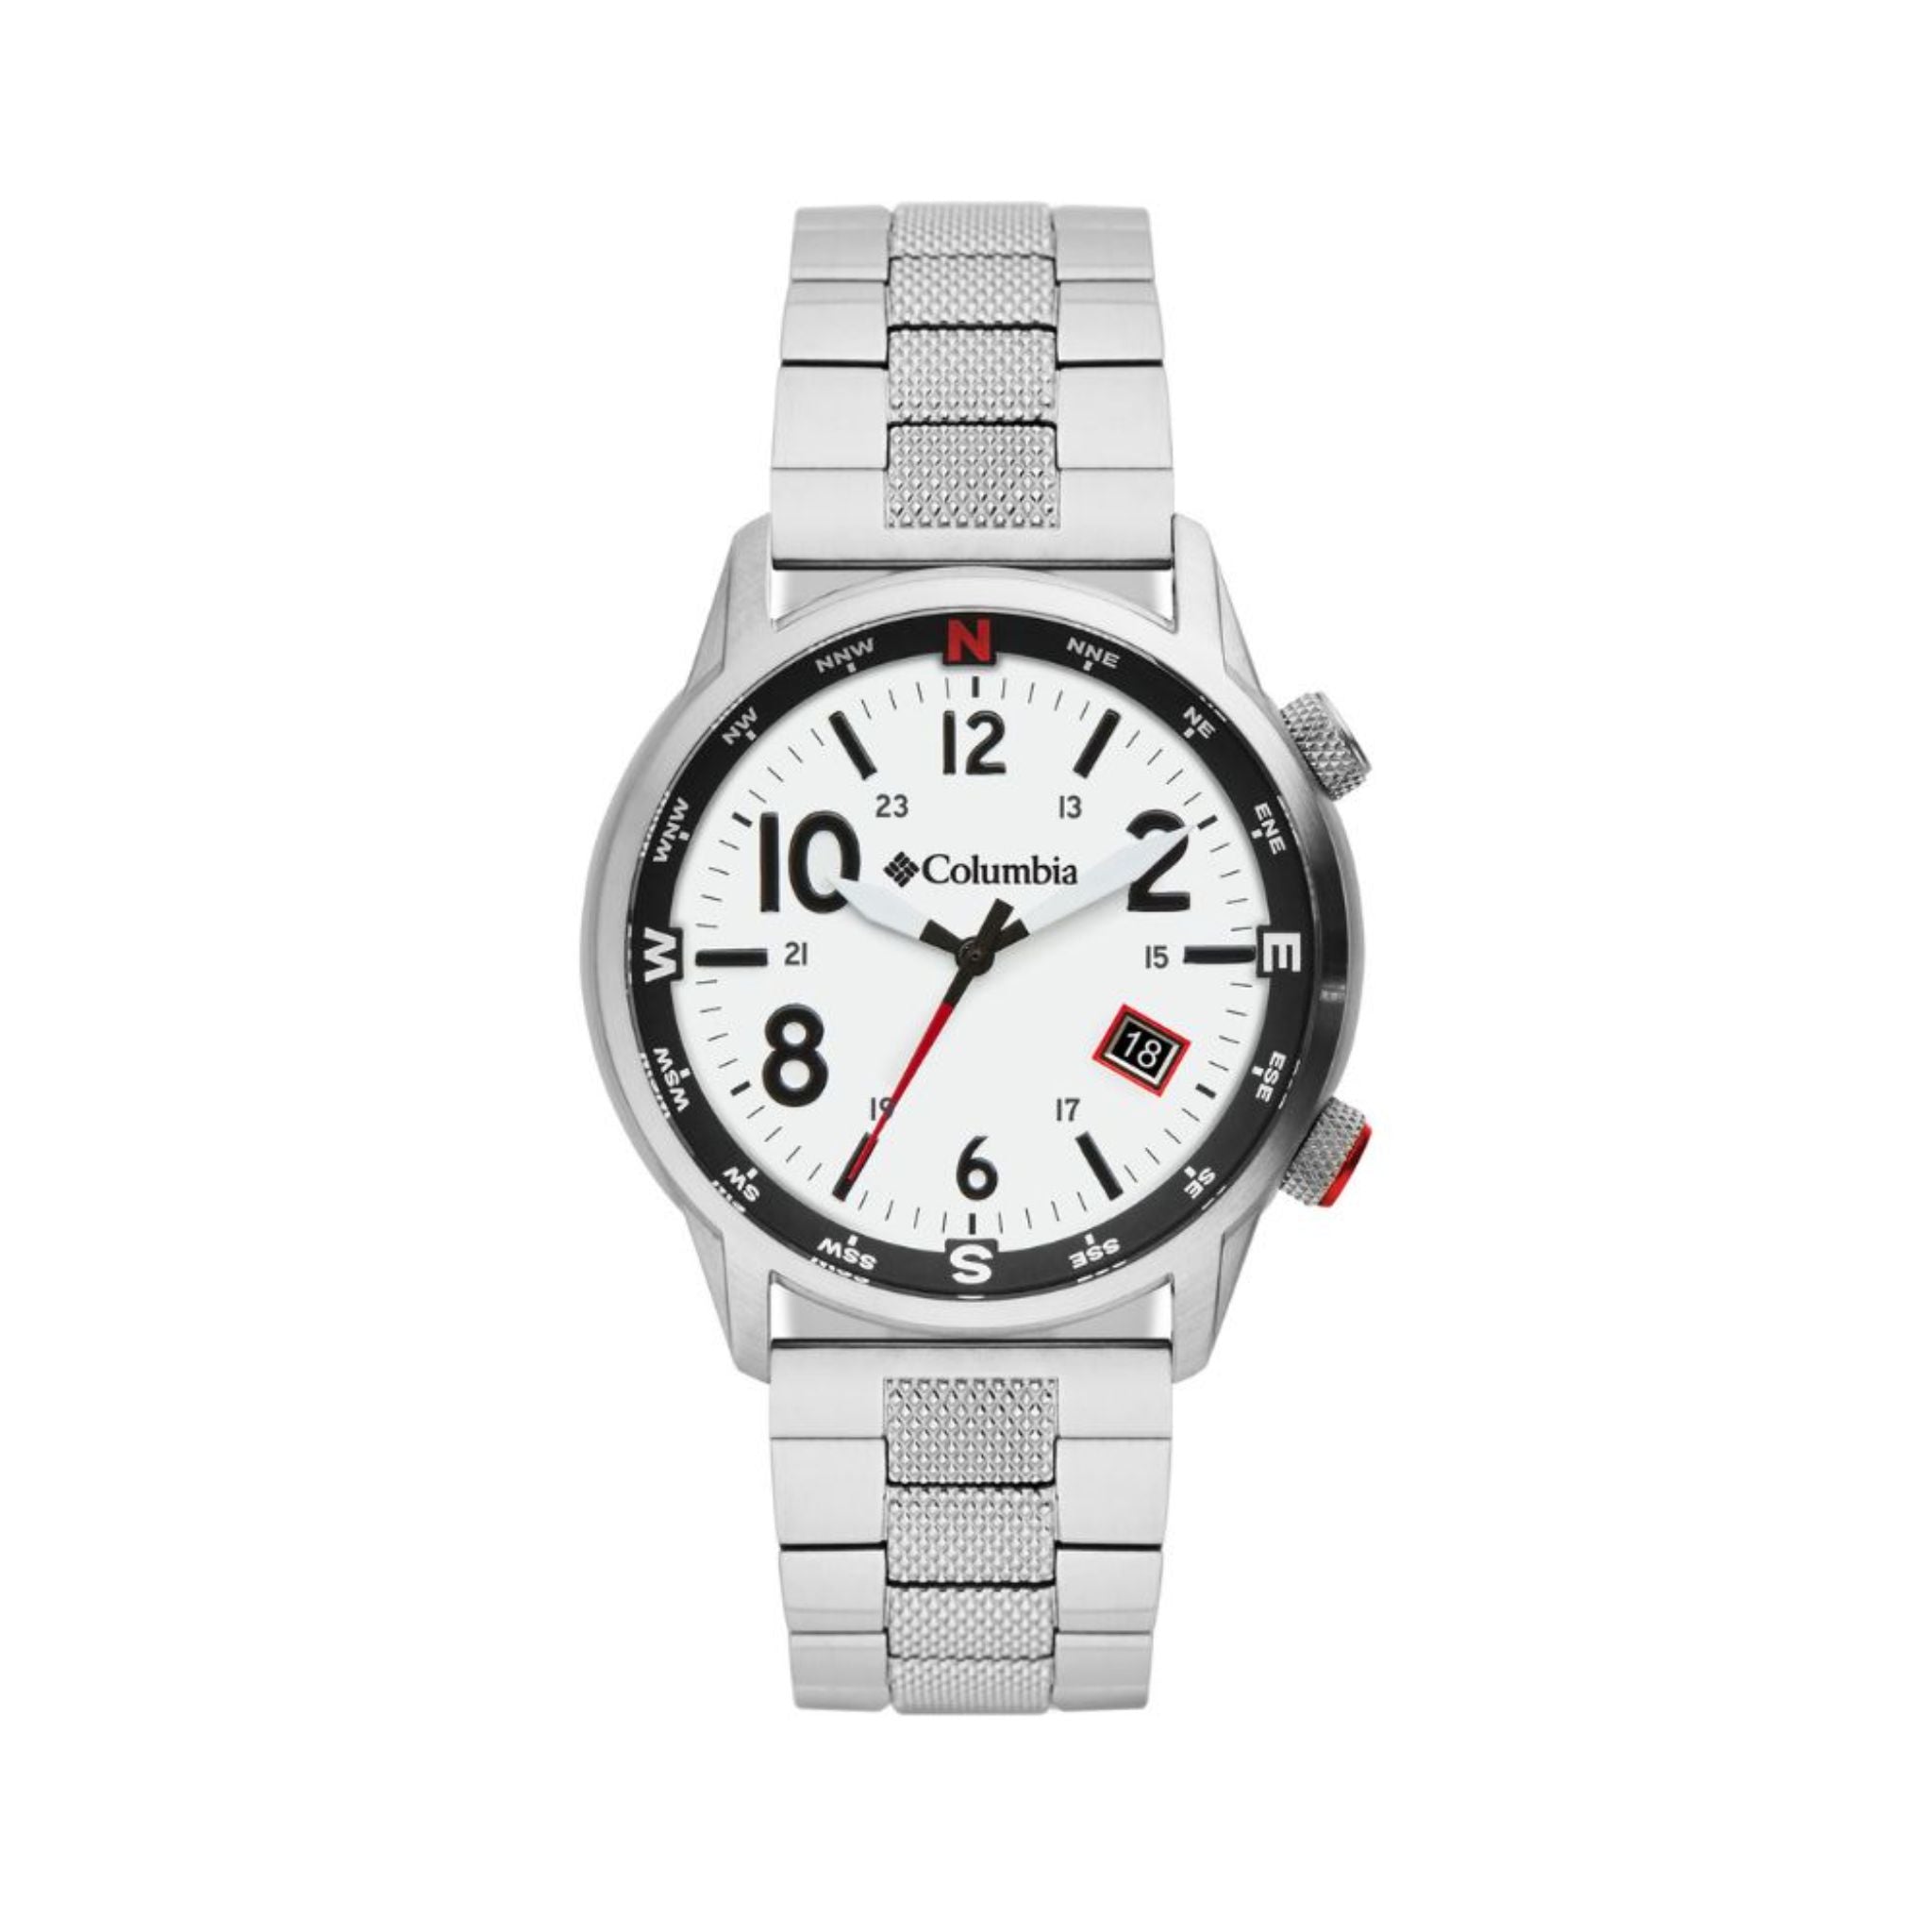 Columbia Watch Outbacker COCS01-006 - Silver